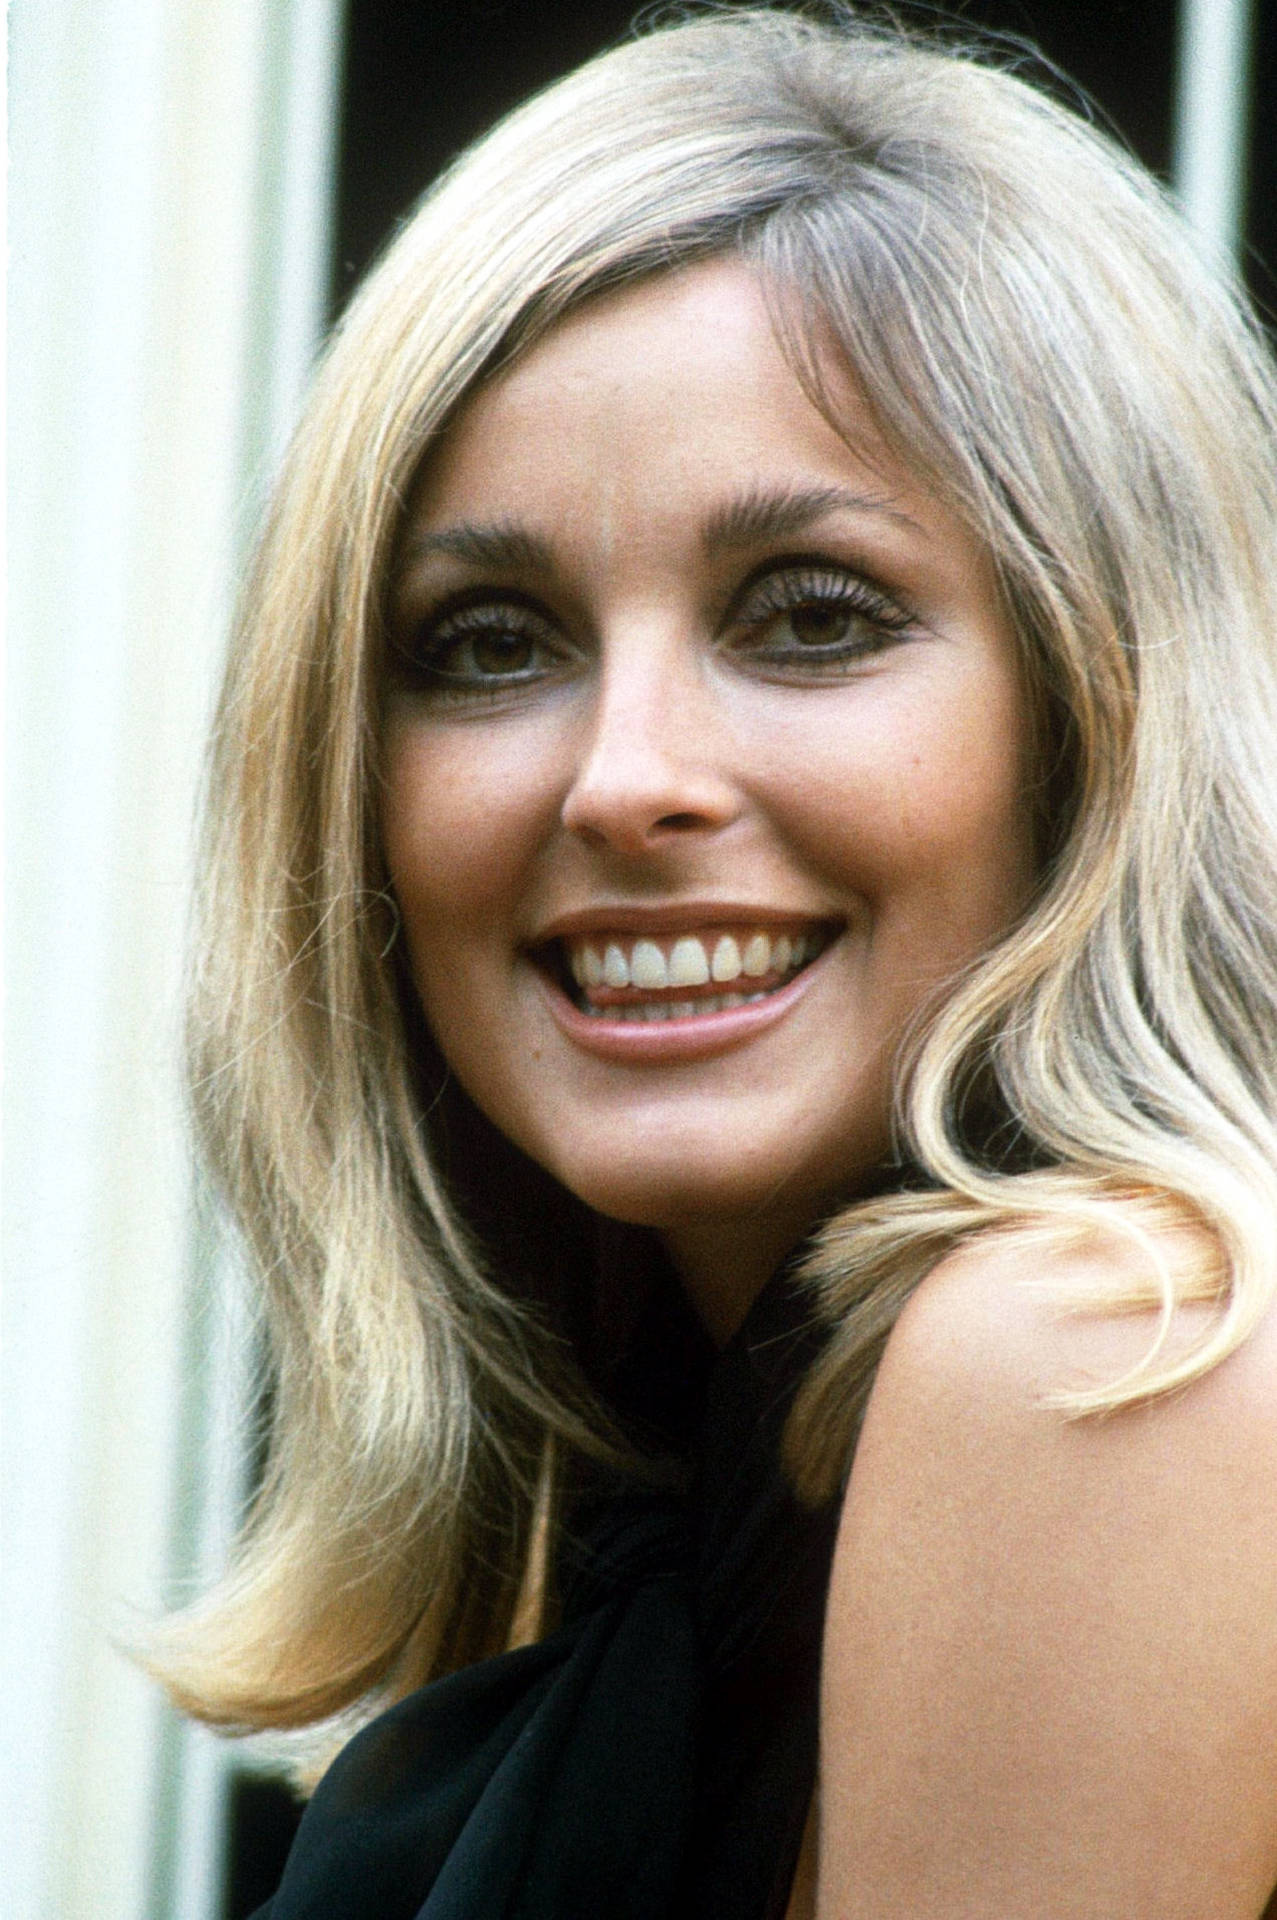 Sharontate Tjusigt Leende. (this Is A Direct Translation, But Please Note That In Swedish, It Is Less Common To Use A Person's Name Followed By An Adjective To Describe Them. It May Be More Appropriate To Use A Full Sentence When Referring To Someone's Smile As Charming, Such As 